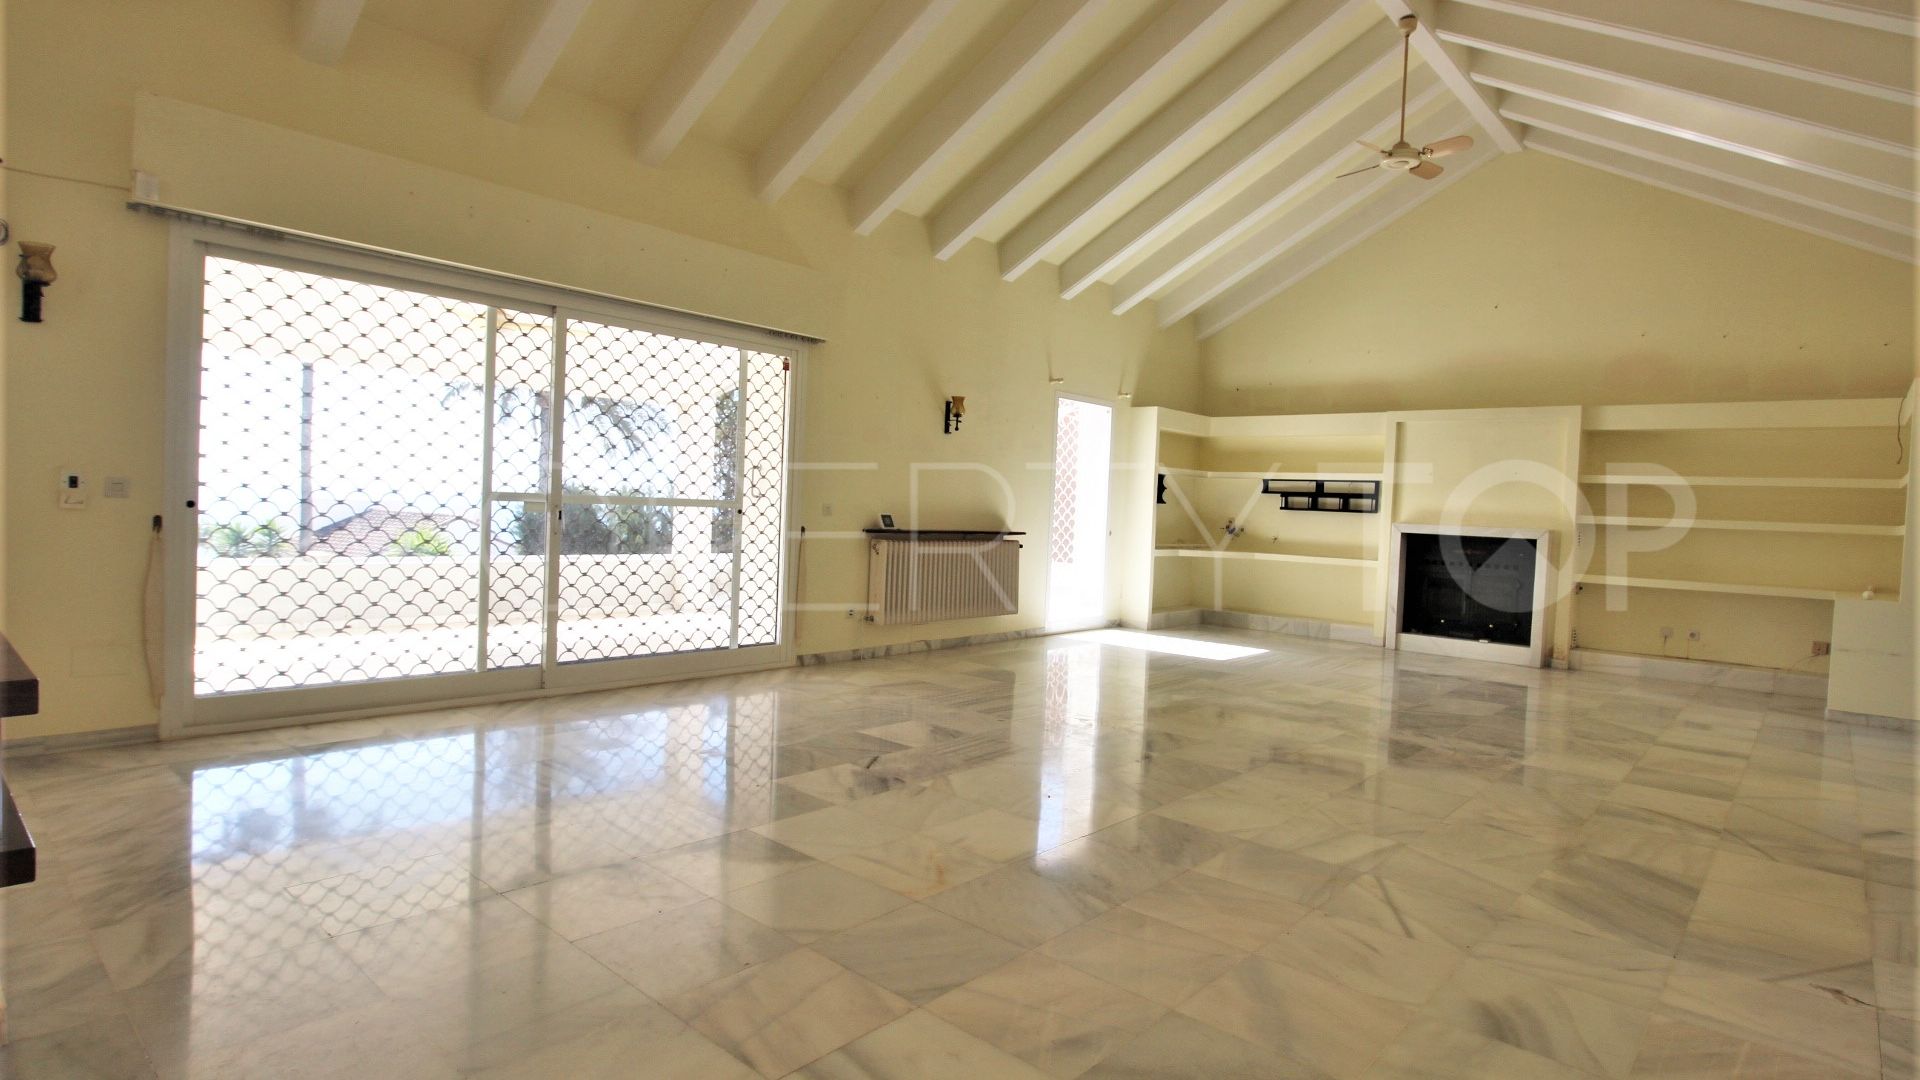 For sale villa with 4 bedrooms in Seghers